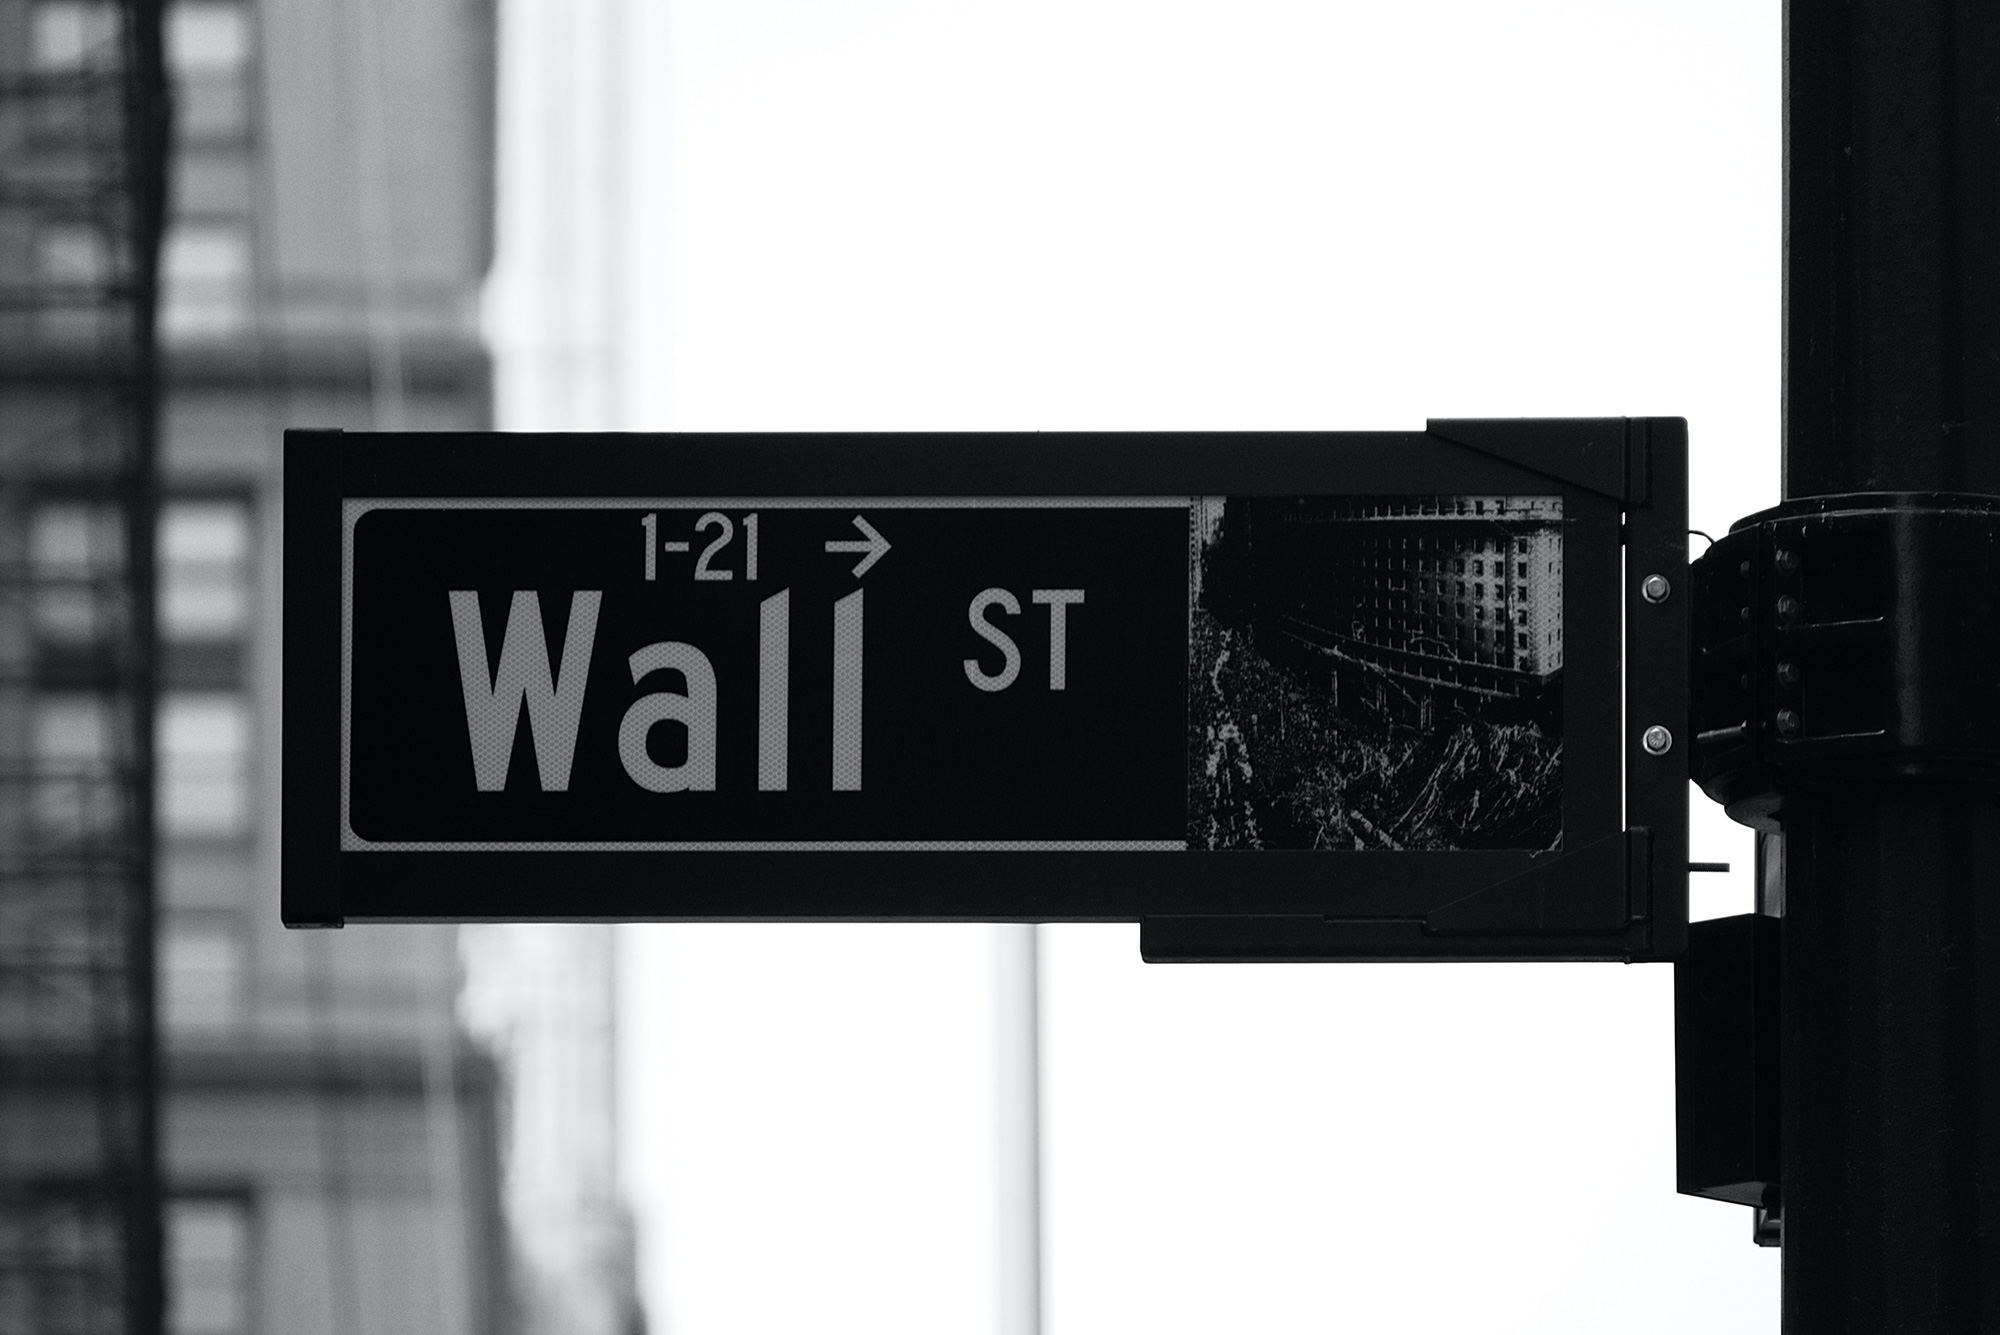 photo of a Wall Street street sign